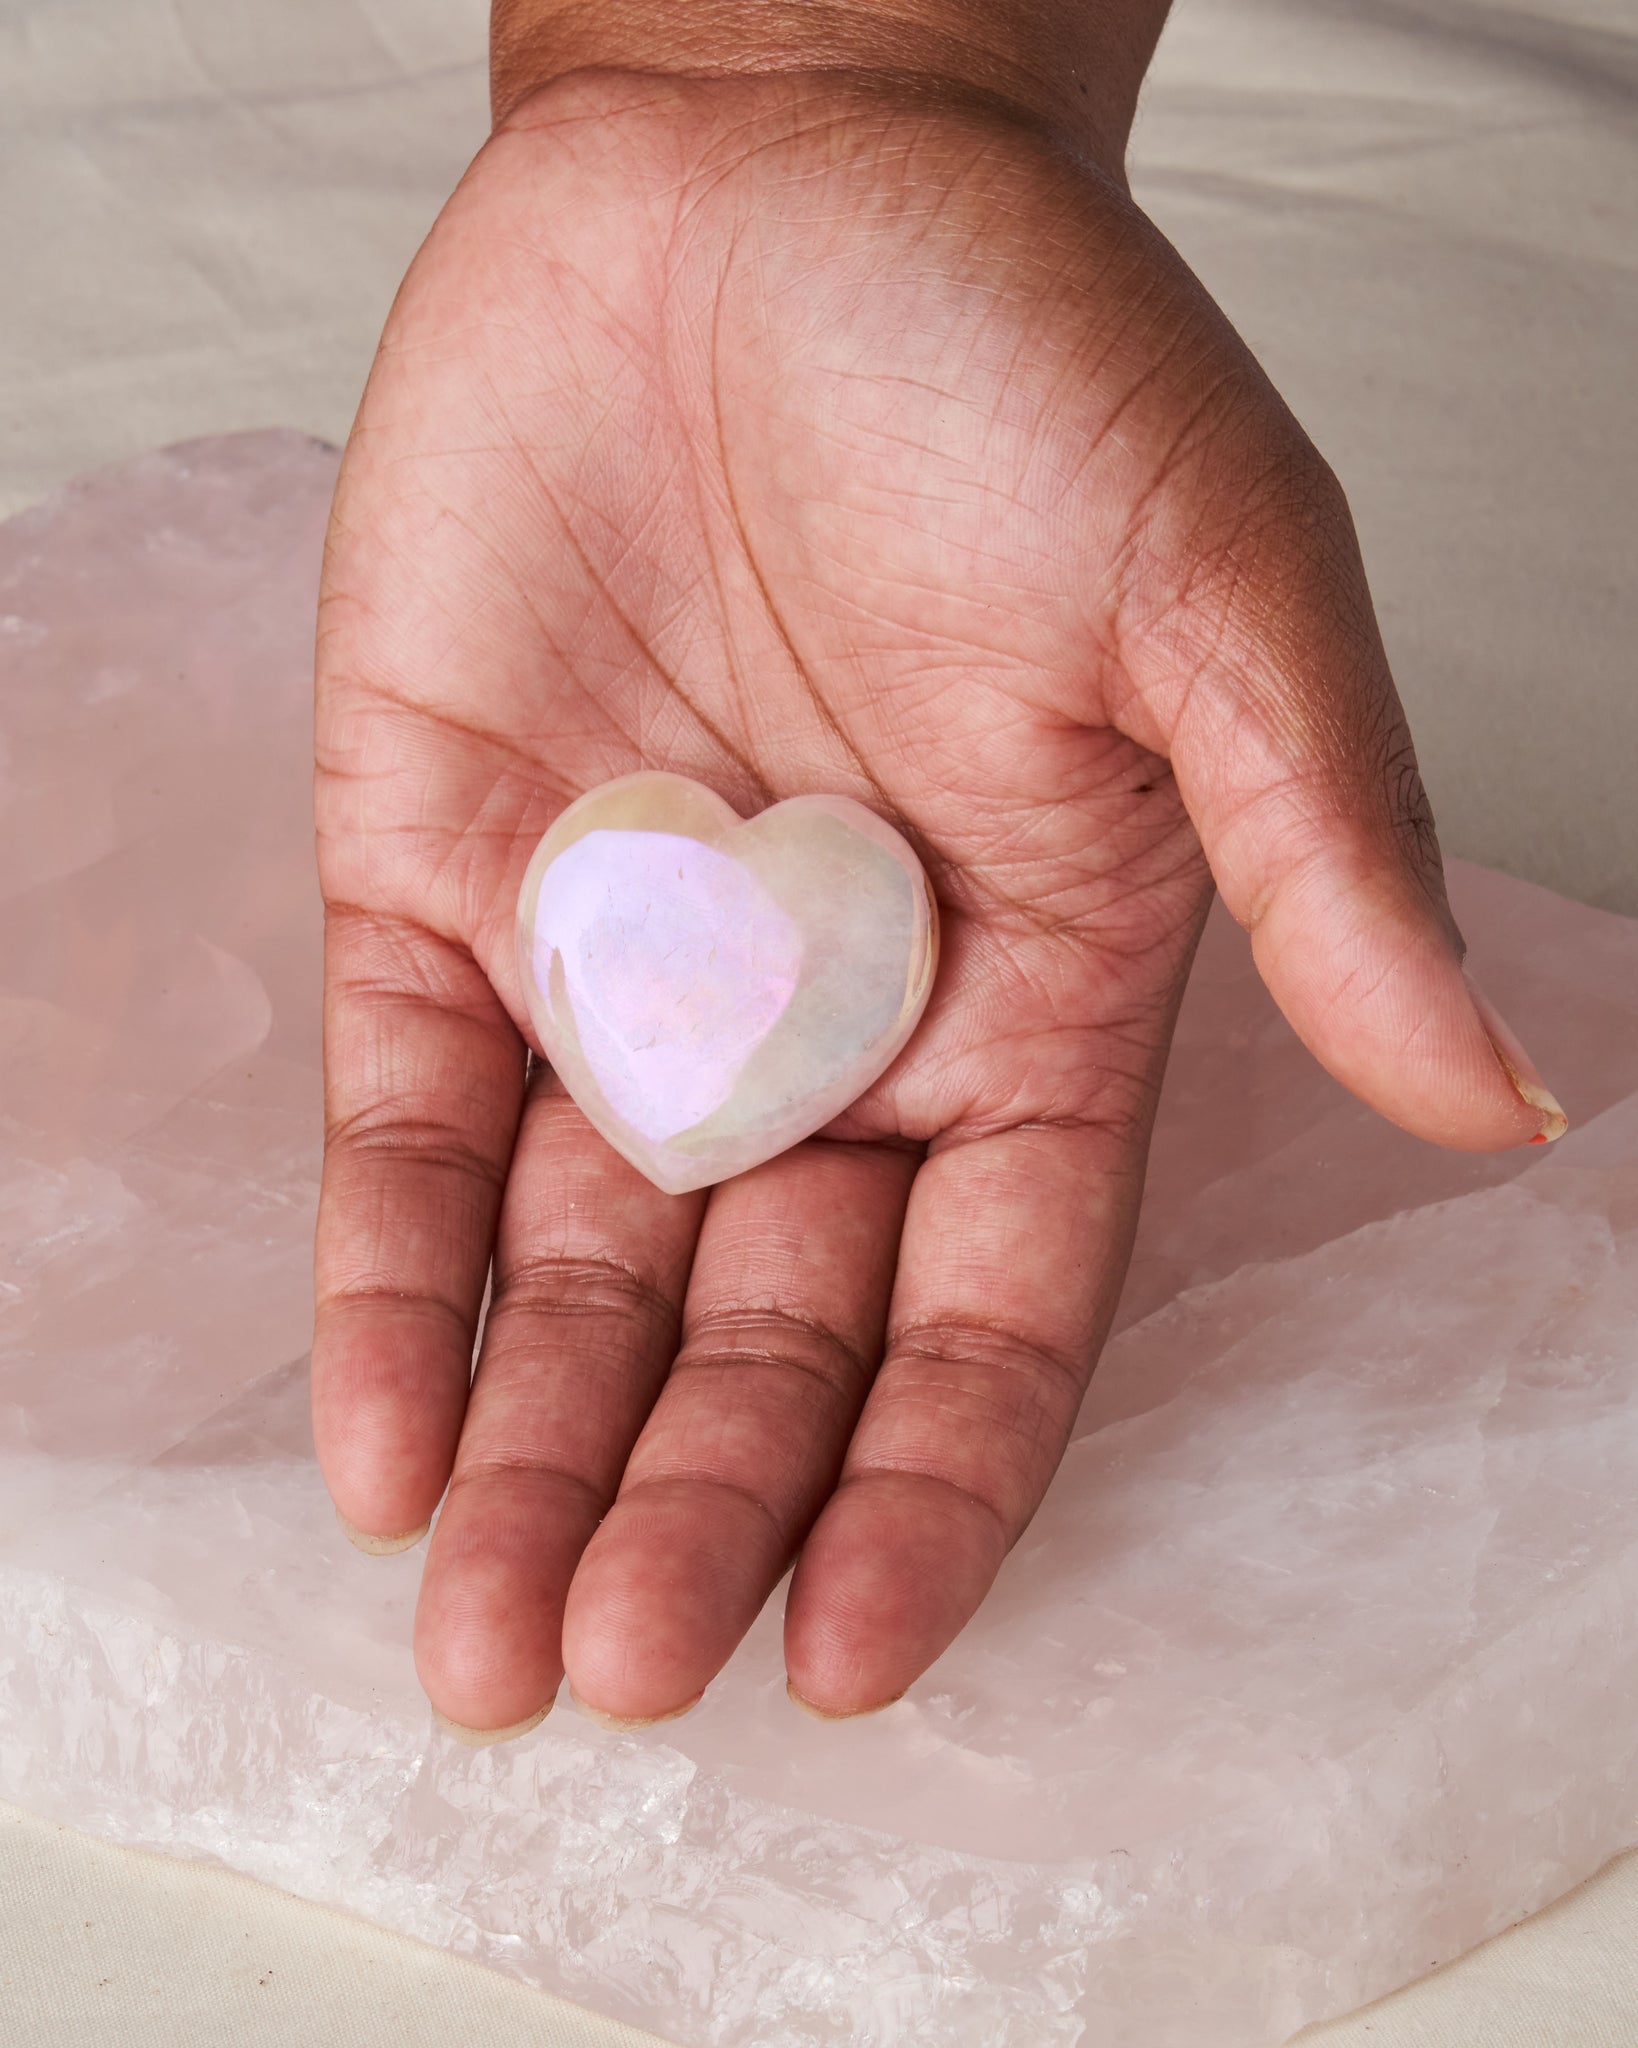 Elevate Your Heart Chakra with Angel Aura Rose Quartz | Conducts Loving Energy | Amplifies Intentions | Promotes Calm, Peace, and Tenderness | Ideal for Meditation and Healing | Enhances Self-Love and Emotional Balance | Polished Angel Aura Rose Quartz Heart Stone | 1.5 x 1.5”